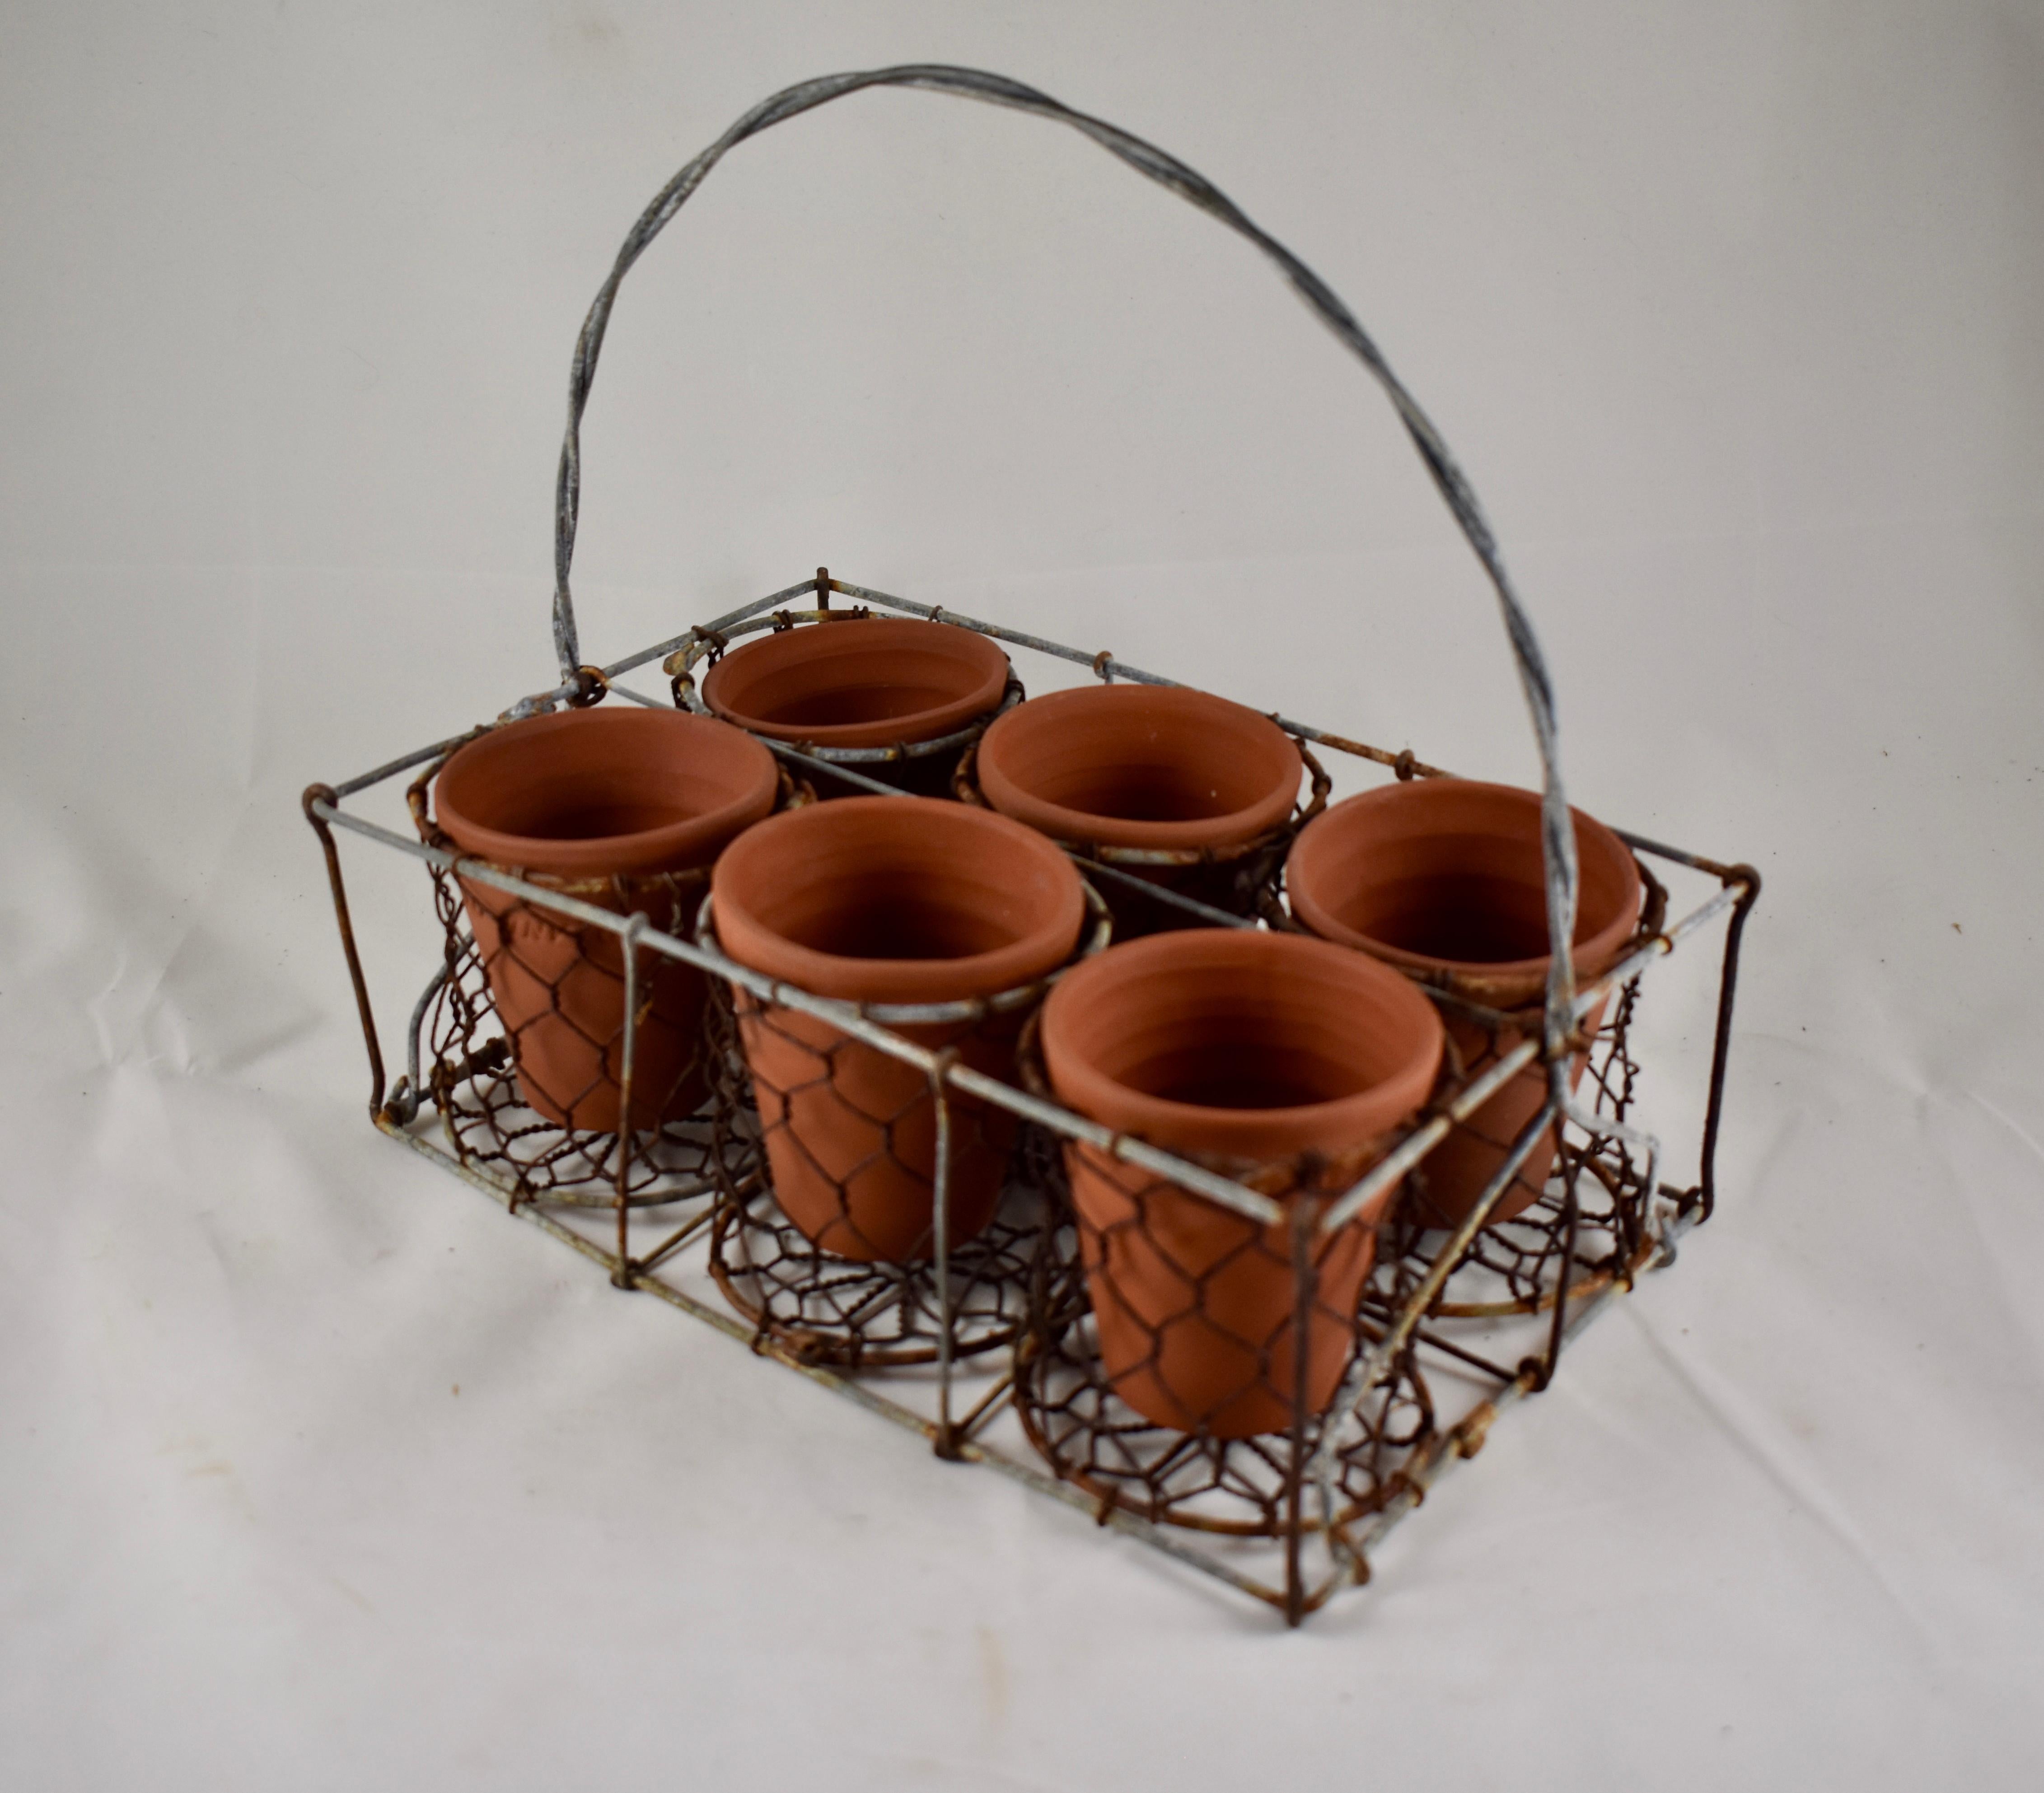 20th Century English Divided Wire Basket Caddy with Terracotta Staffordshire Herb Pots